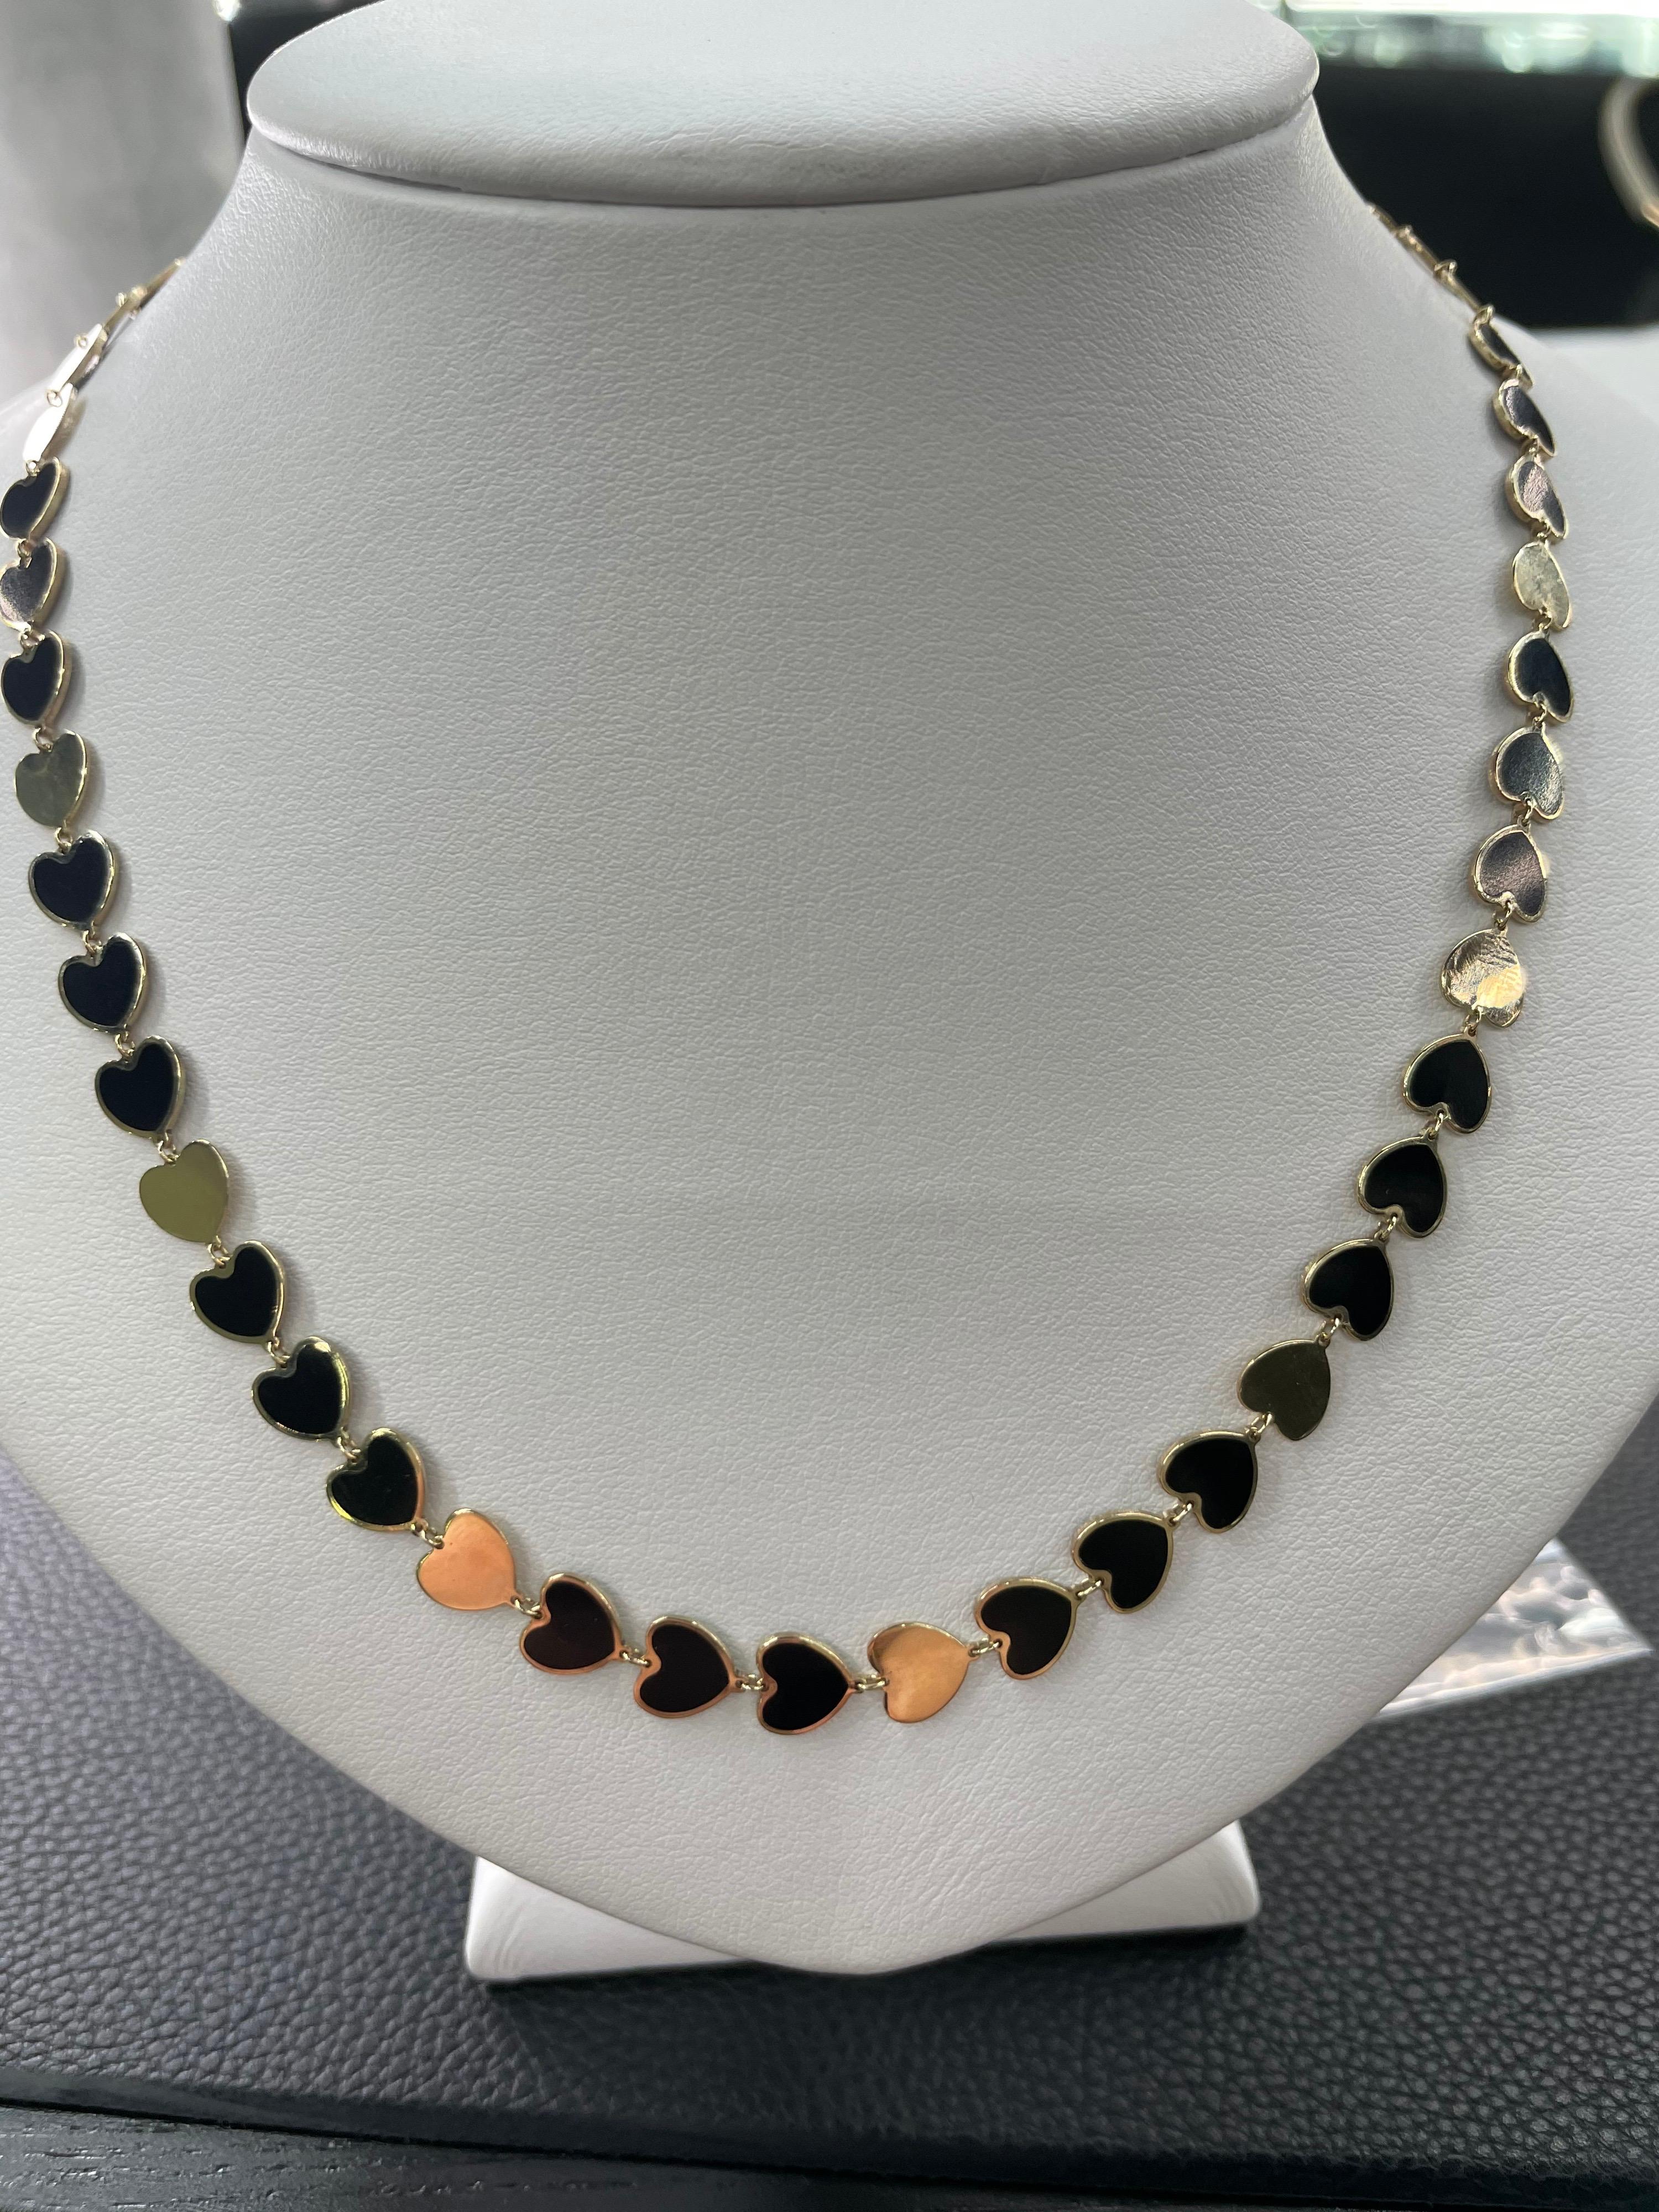 Italian 14k yellow gold necklace featuring onyx gold trim hearts and solid gold hearts. The necklace is 17.75 inches long and can be shortened to 15.5 inches. 9.5 Grams
Available in different colors. 

Can add a charm on the open heart link.